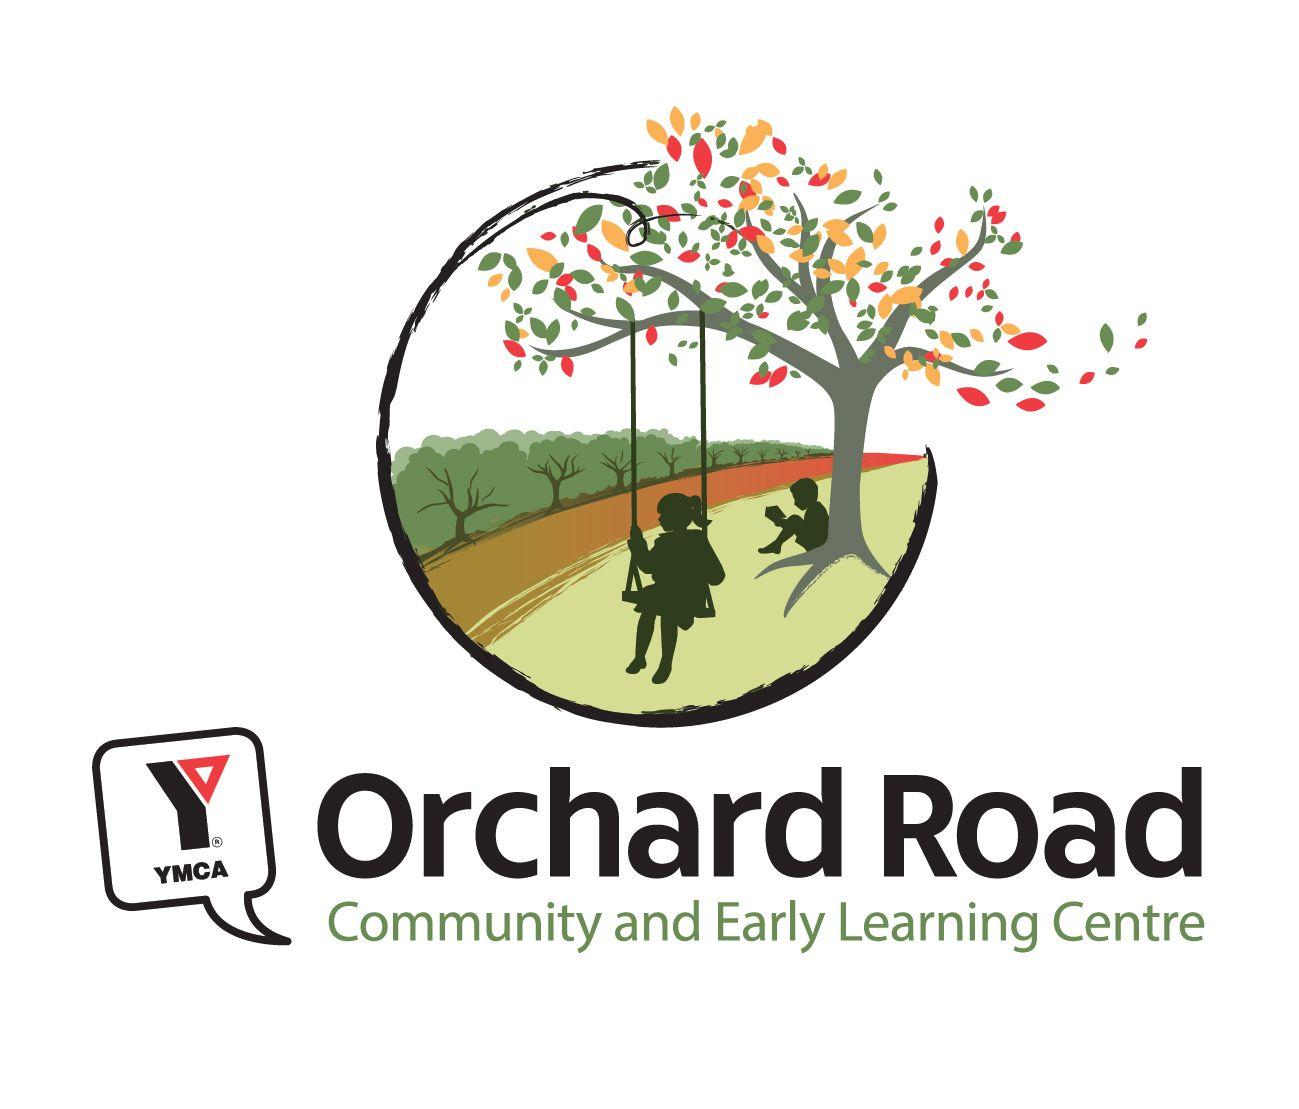 Orchard Logo - YMCA Whittlesea Road Community and Early Learning Centre